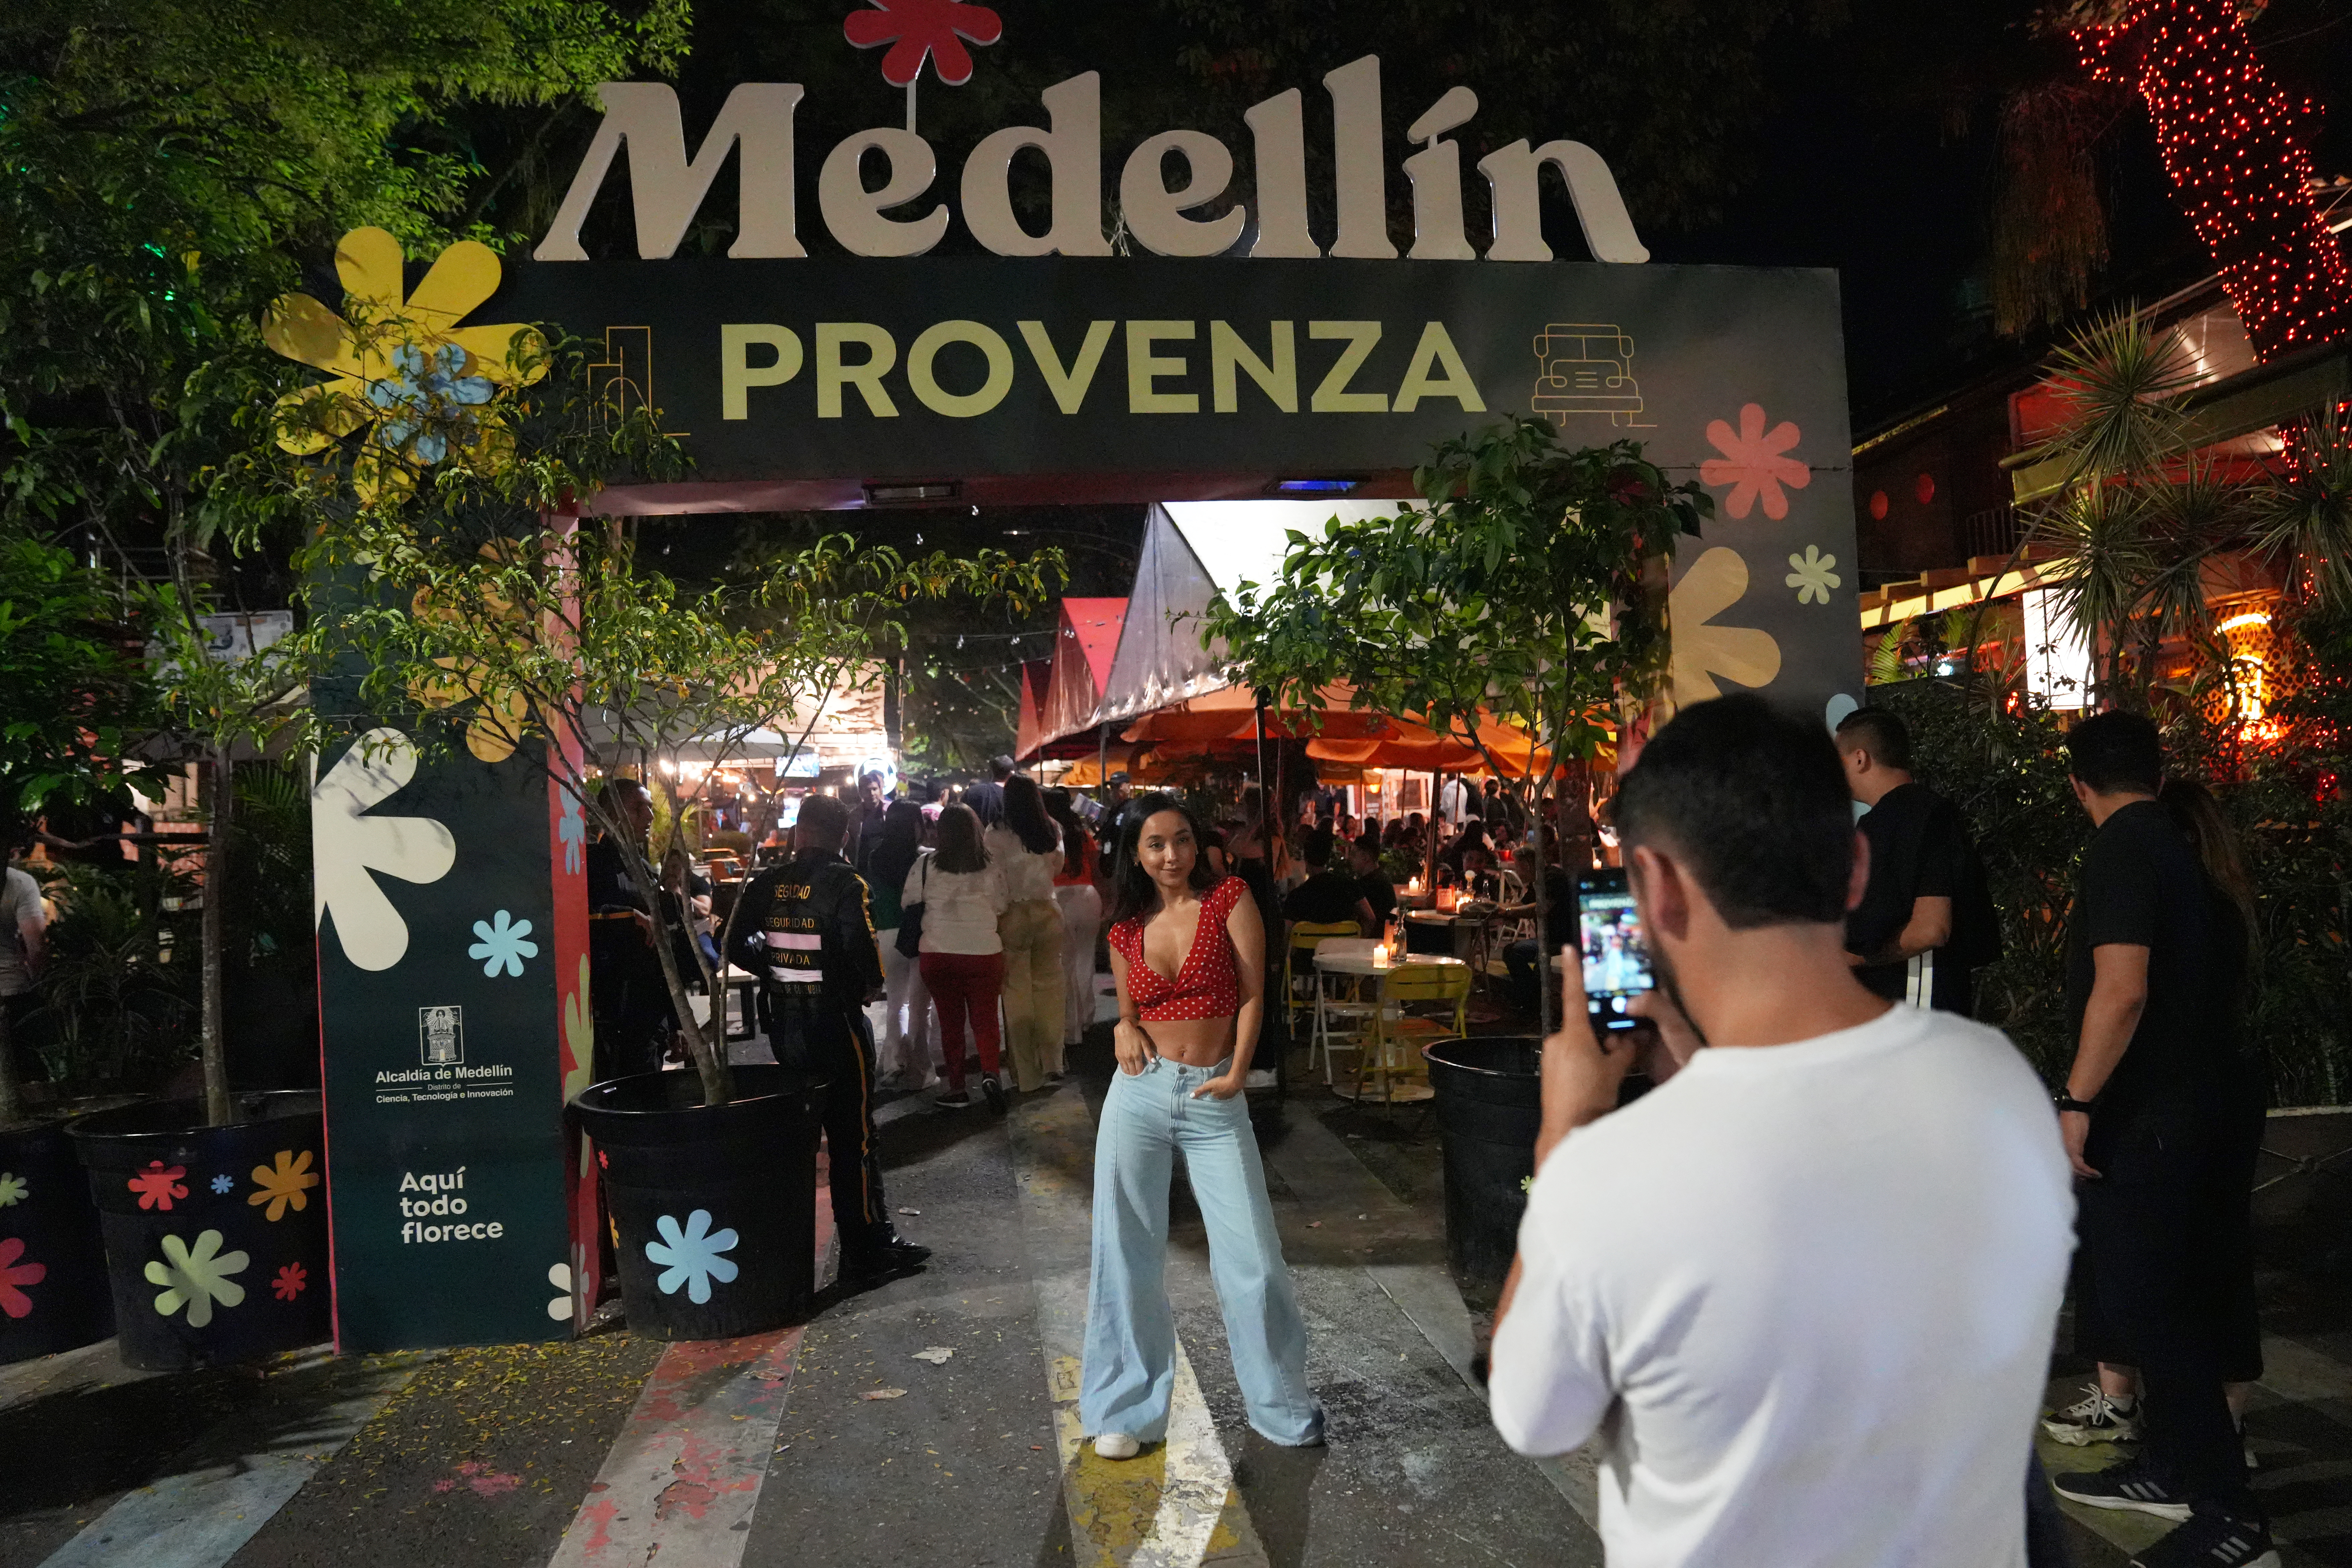 Via Provenza, Medellin's main thoroughfare for nightlife was listed as one of the 